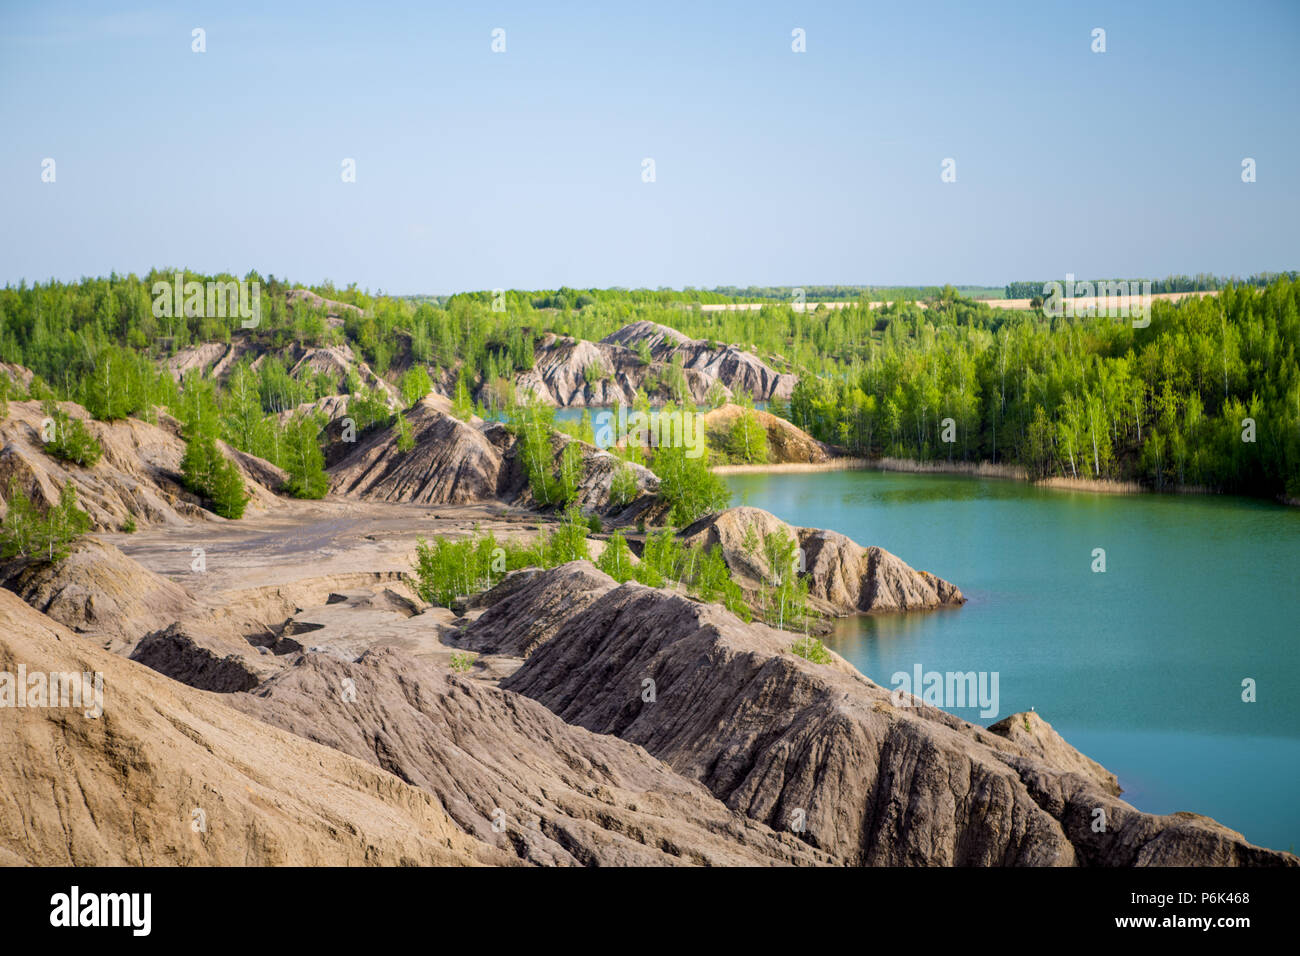 Photo of picturesque hilly area with vegetation and blue lake Stock Photo